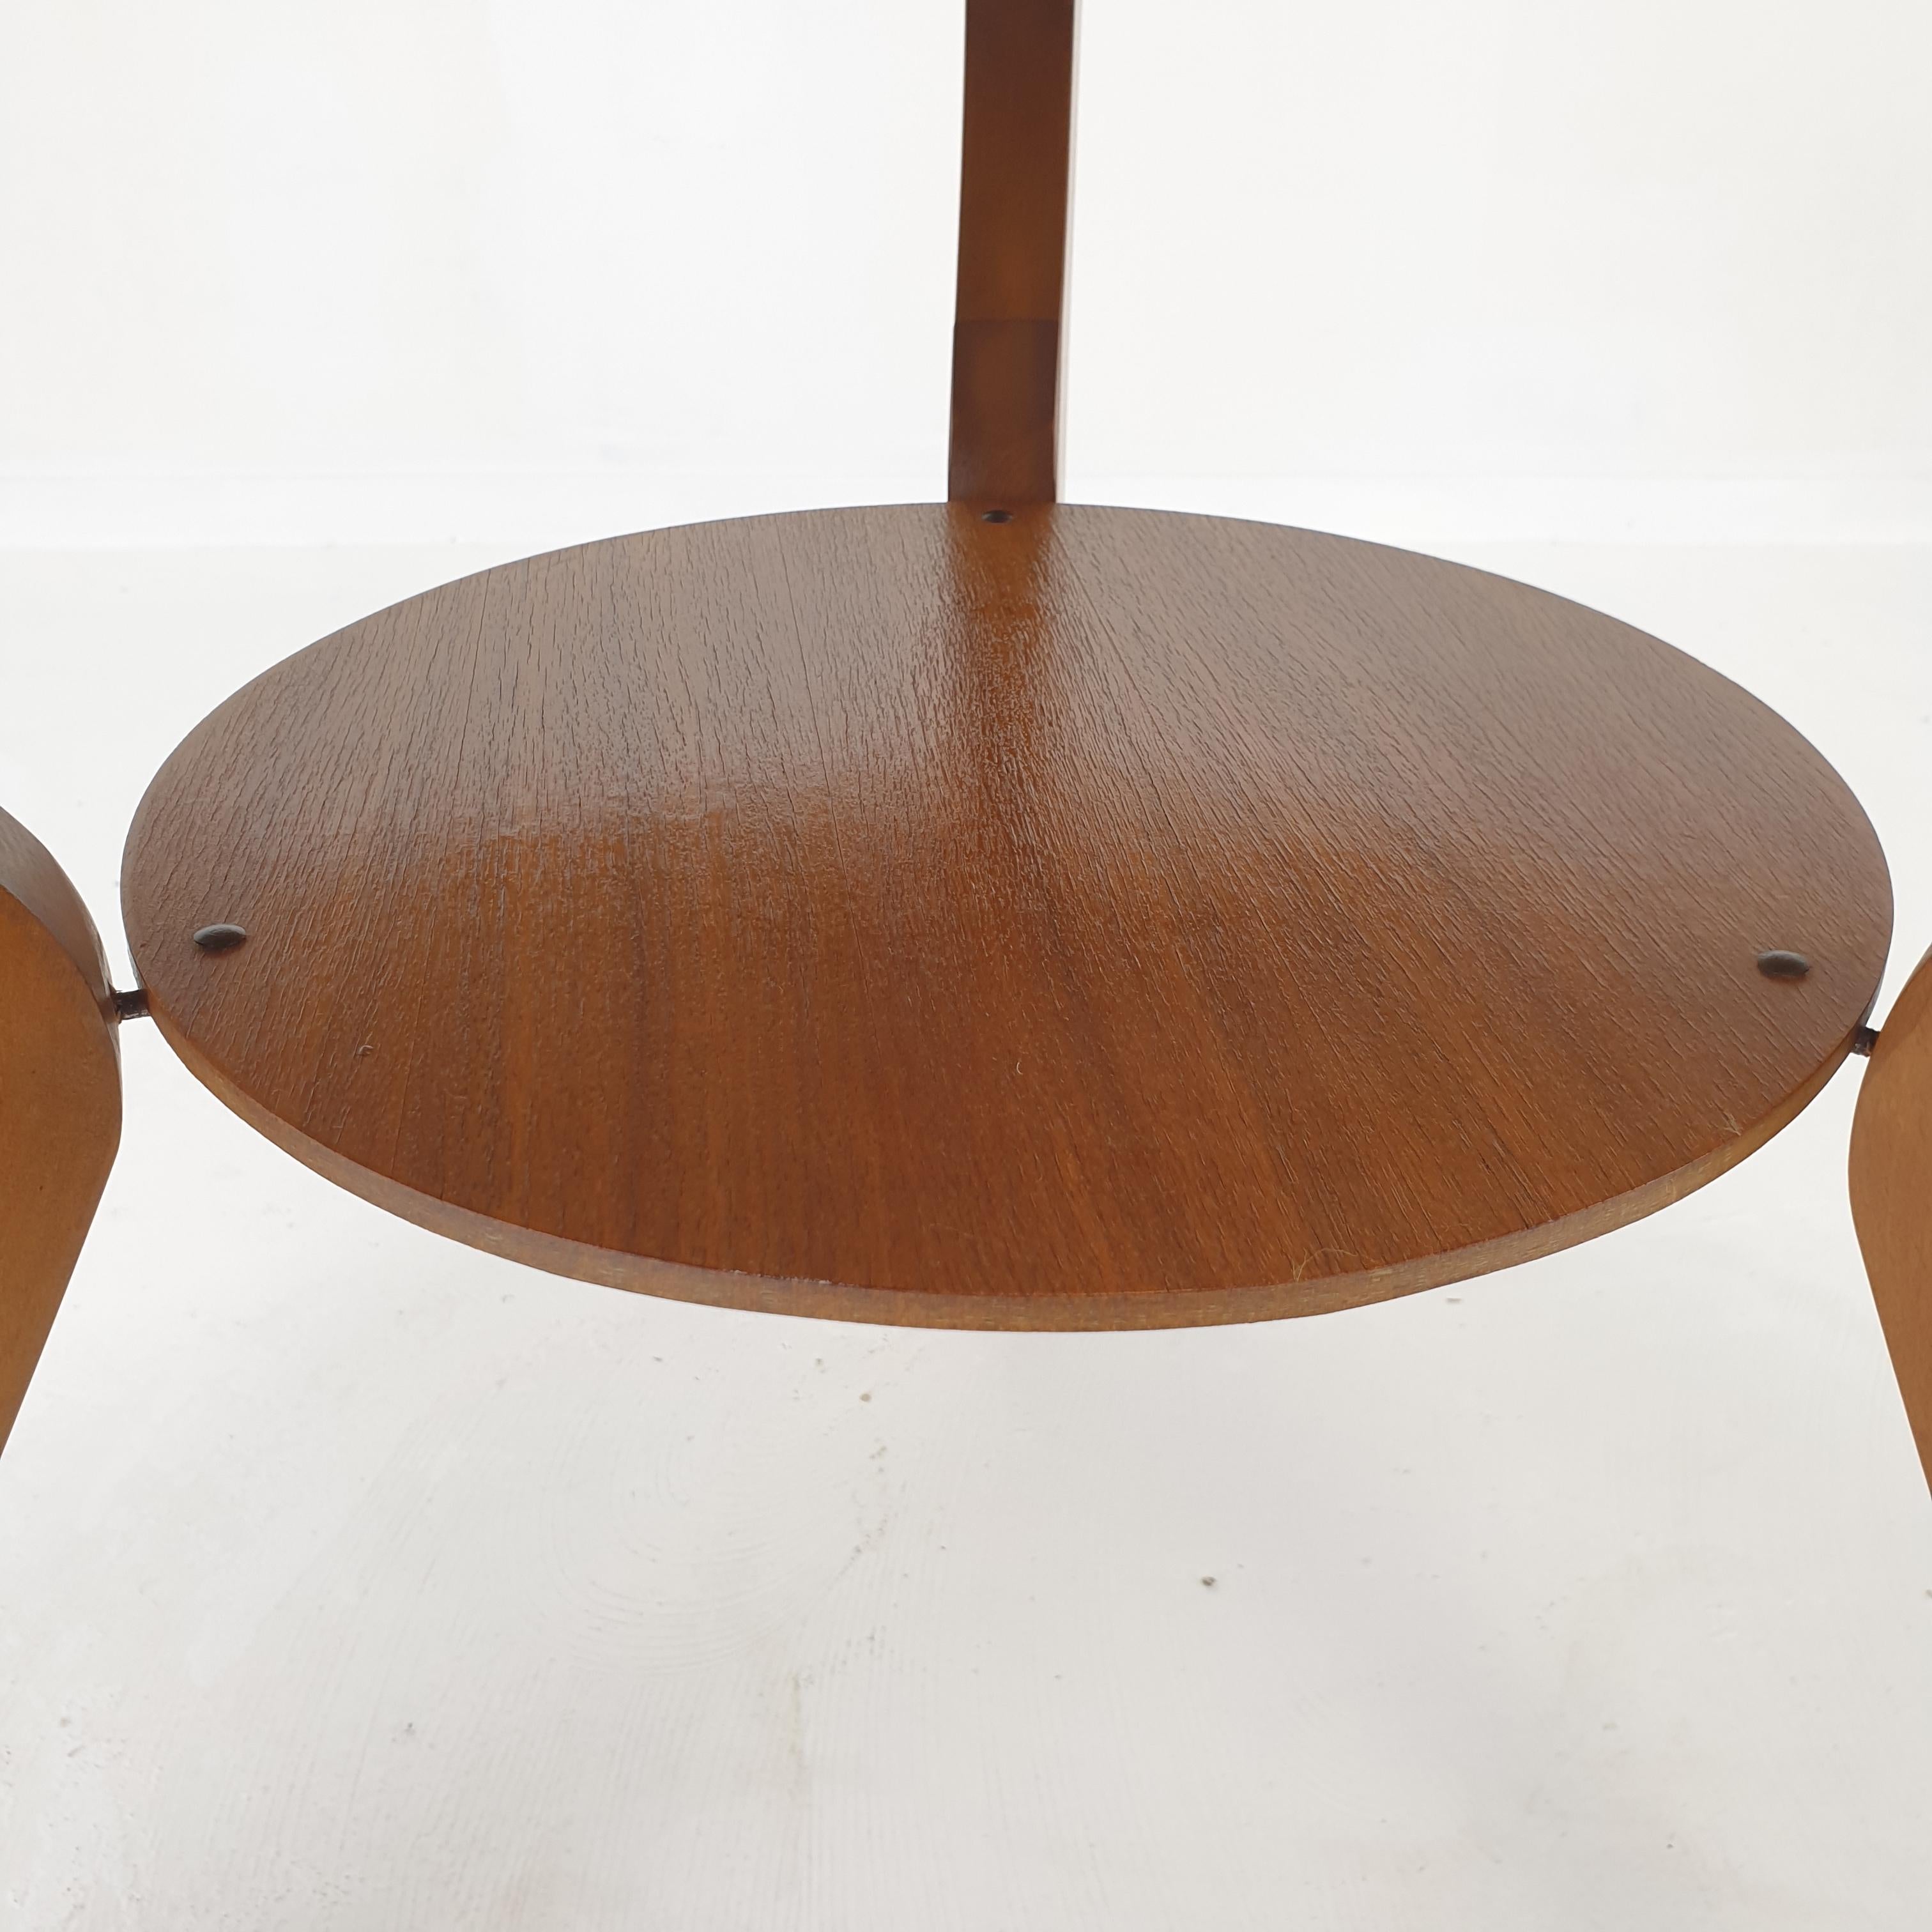 Midcentury Italian Wooden Coffee or Side Table with Brass Feet, 1960s For Sale 13